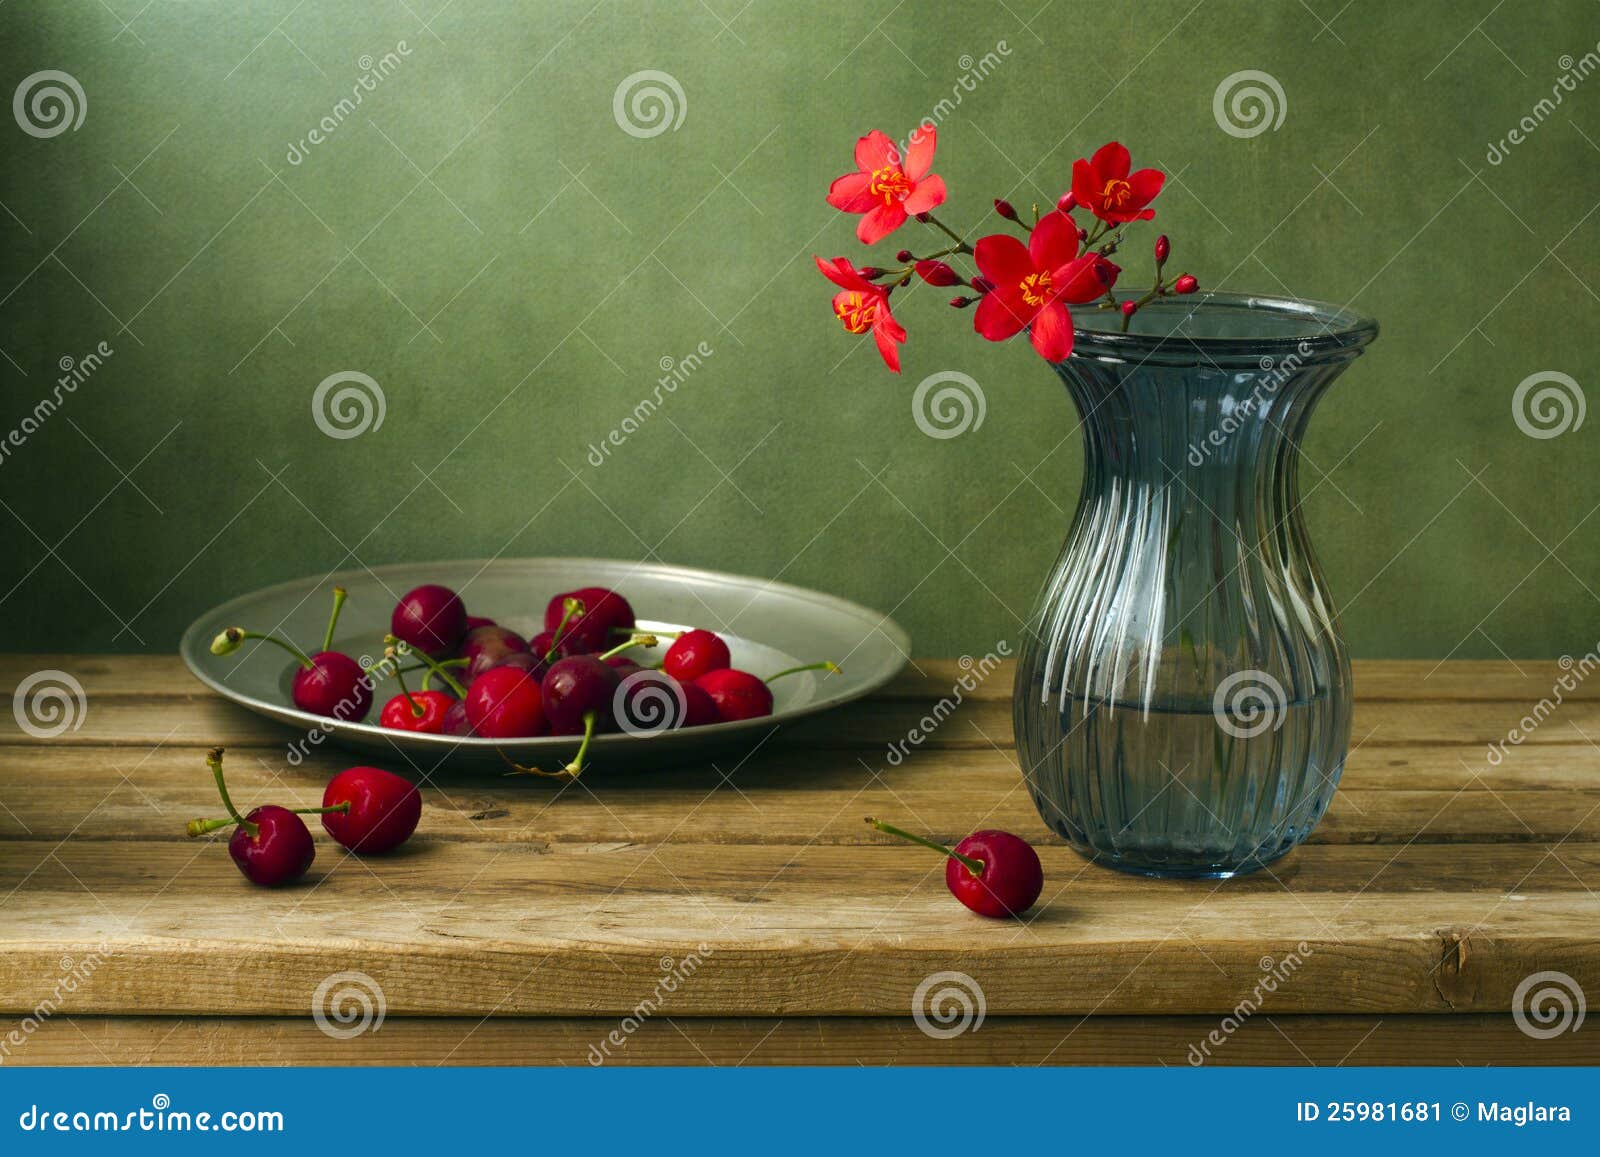 still life with flowers and cherries